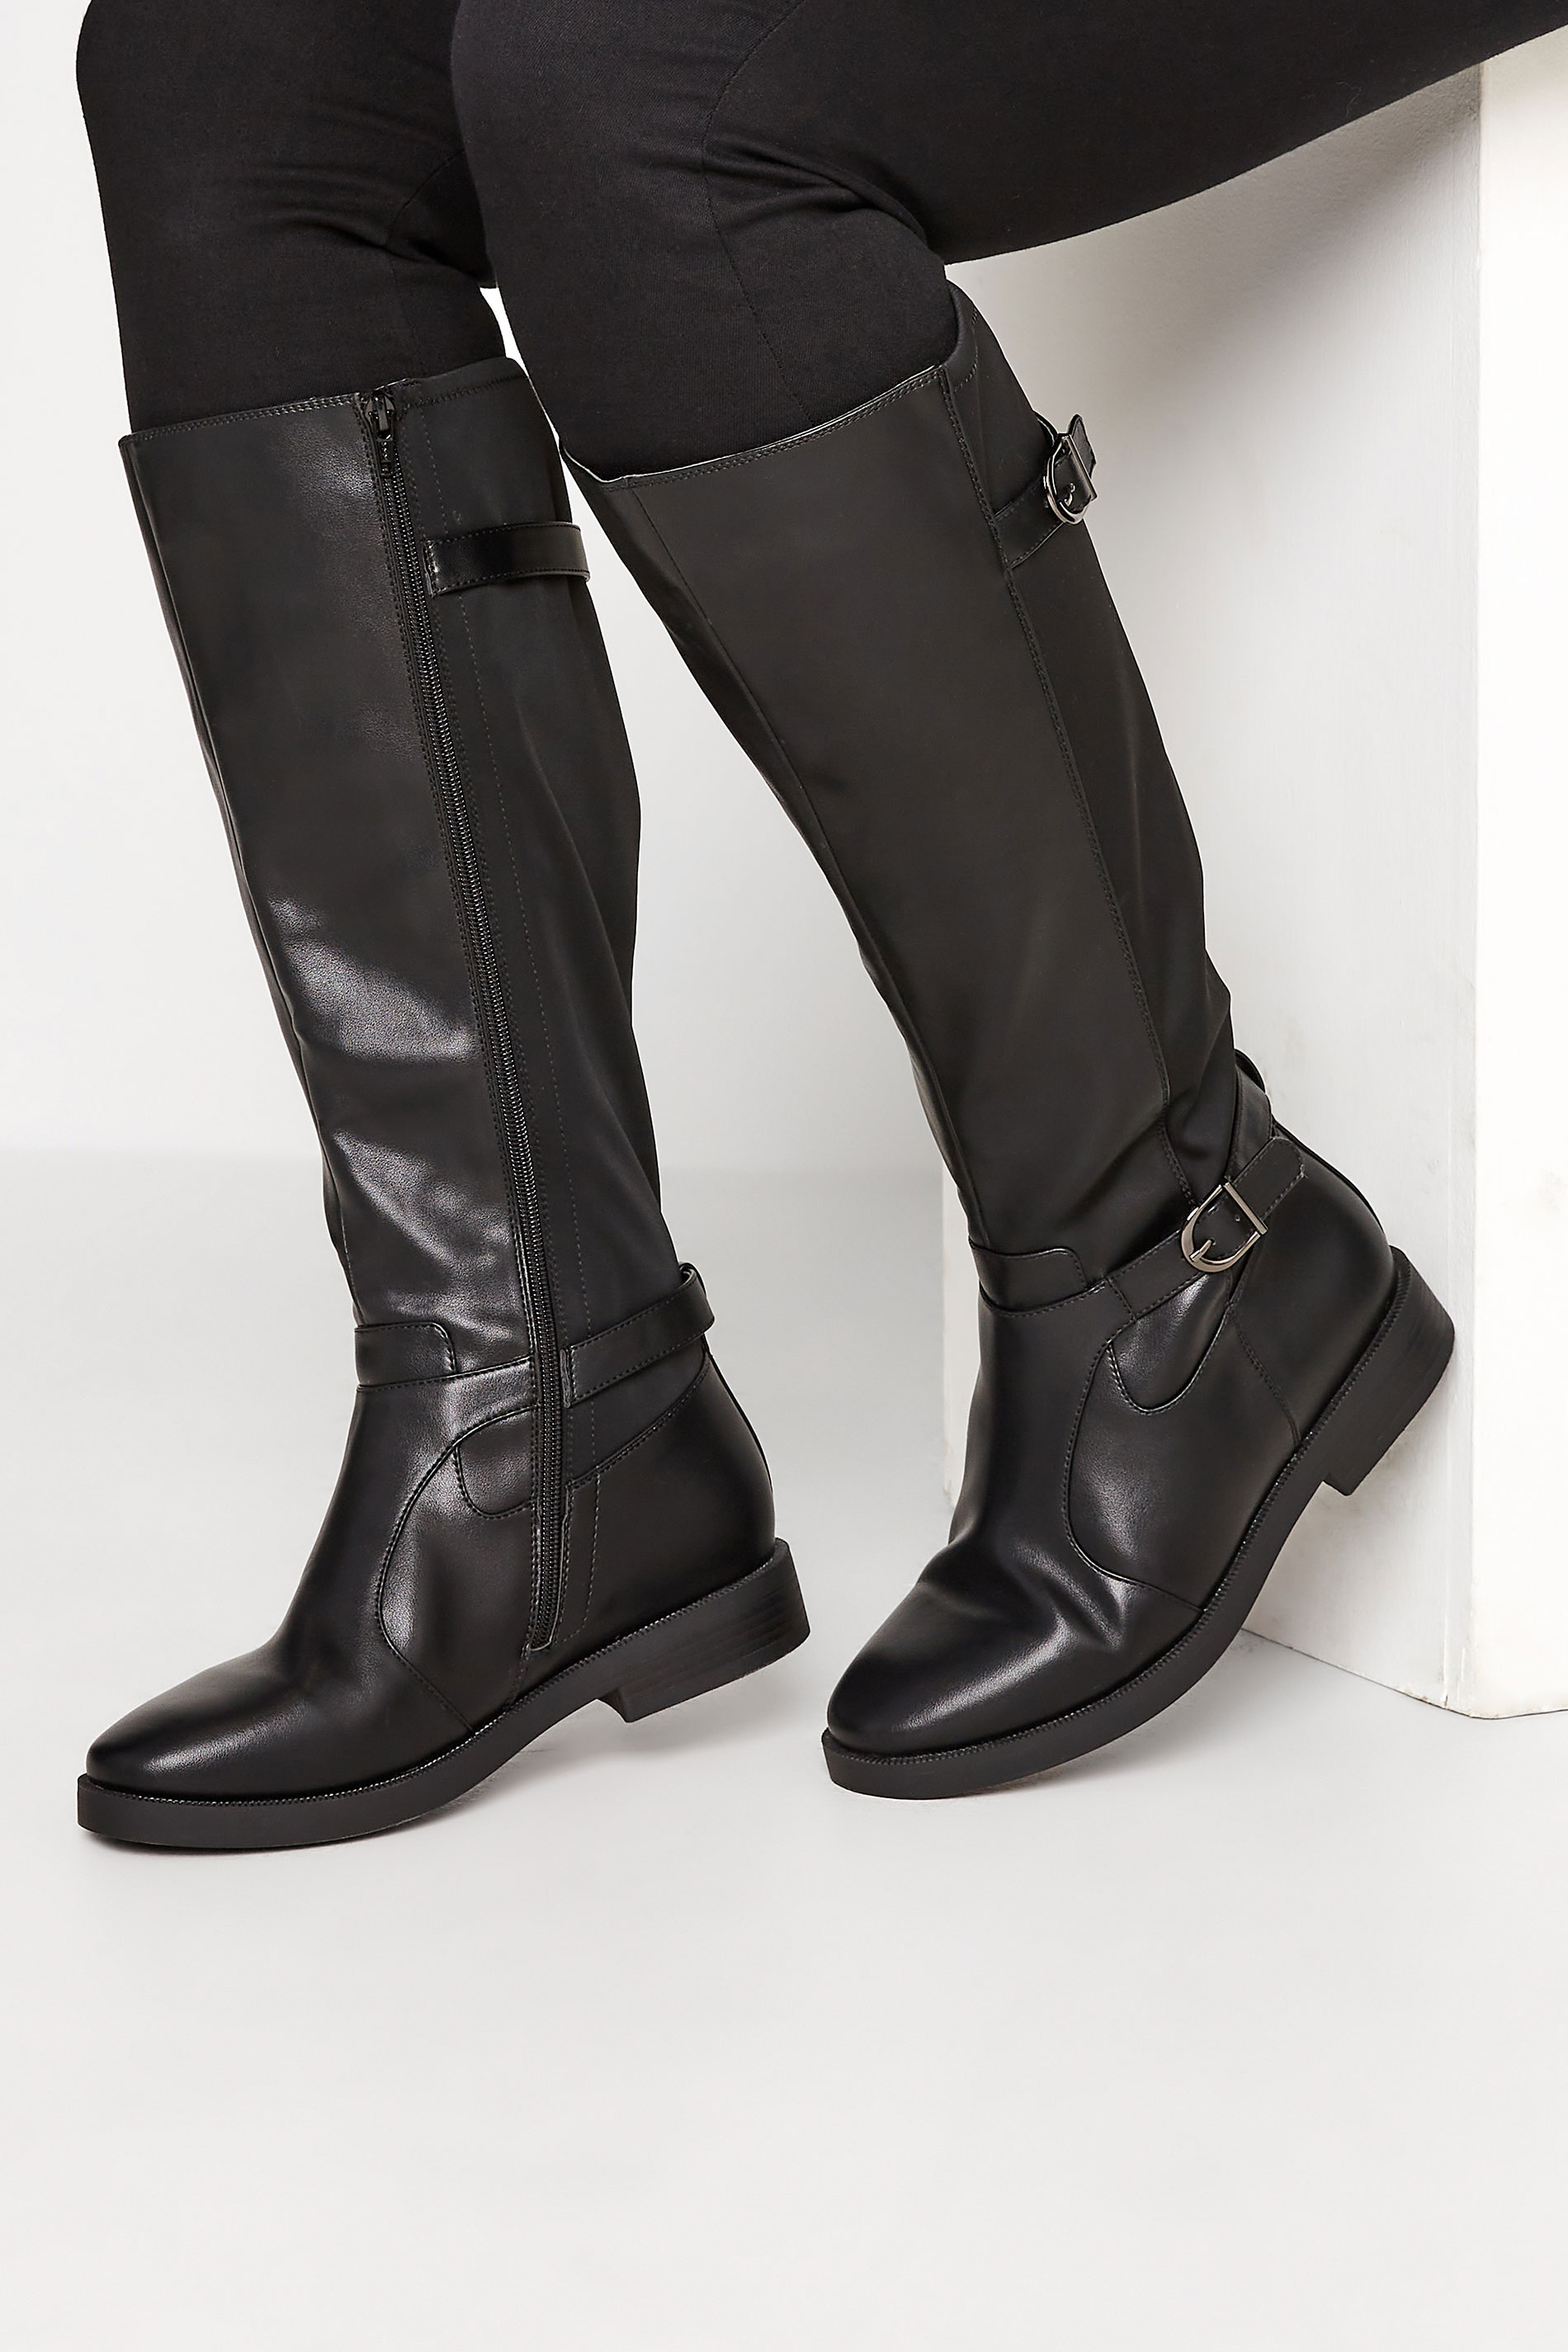 Black Double Strap Knee High Boots In Wide E Fit & Extra Wide EEE Fit 1